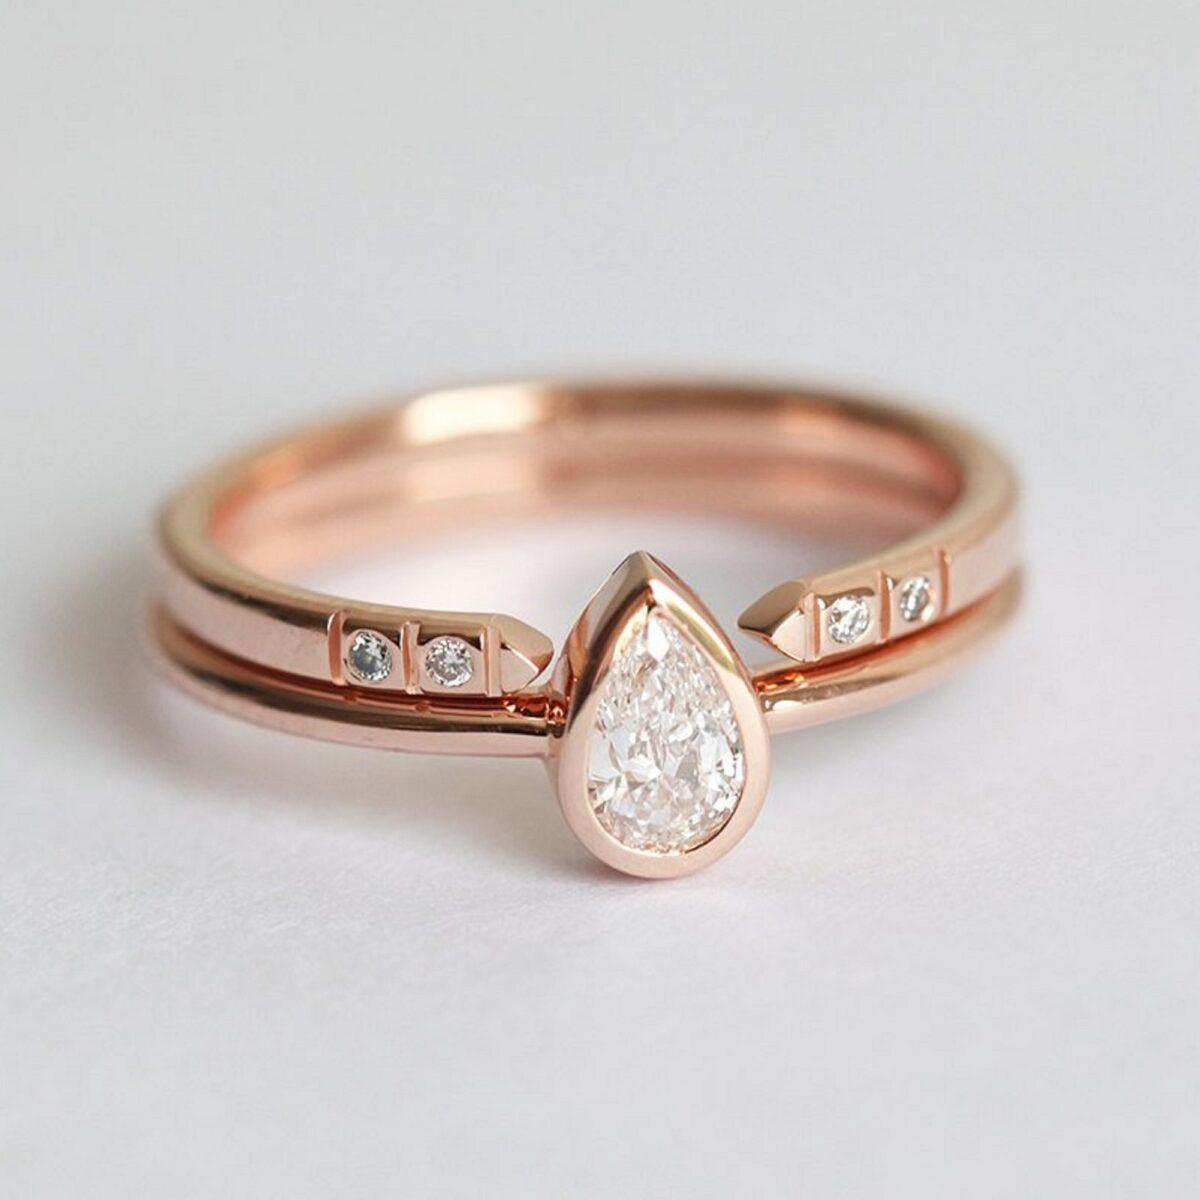 Minimal style pear cut lab grown diamond ring with pave set open gap wedding band crafted in solid 14k rose gold.